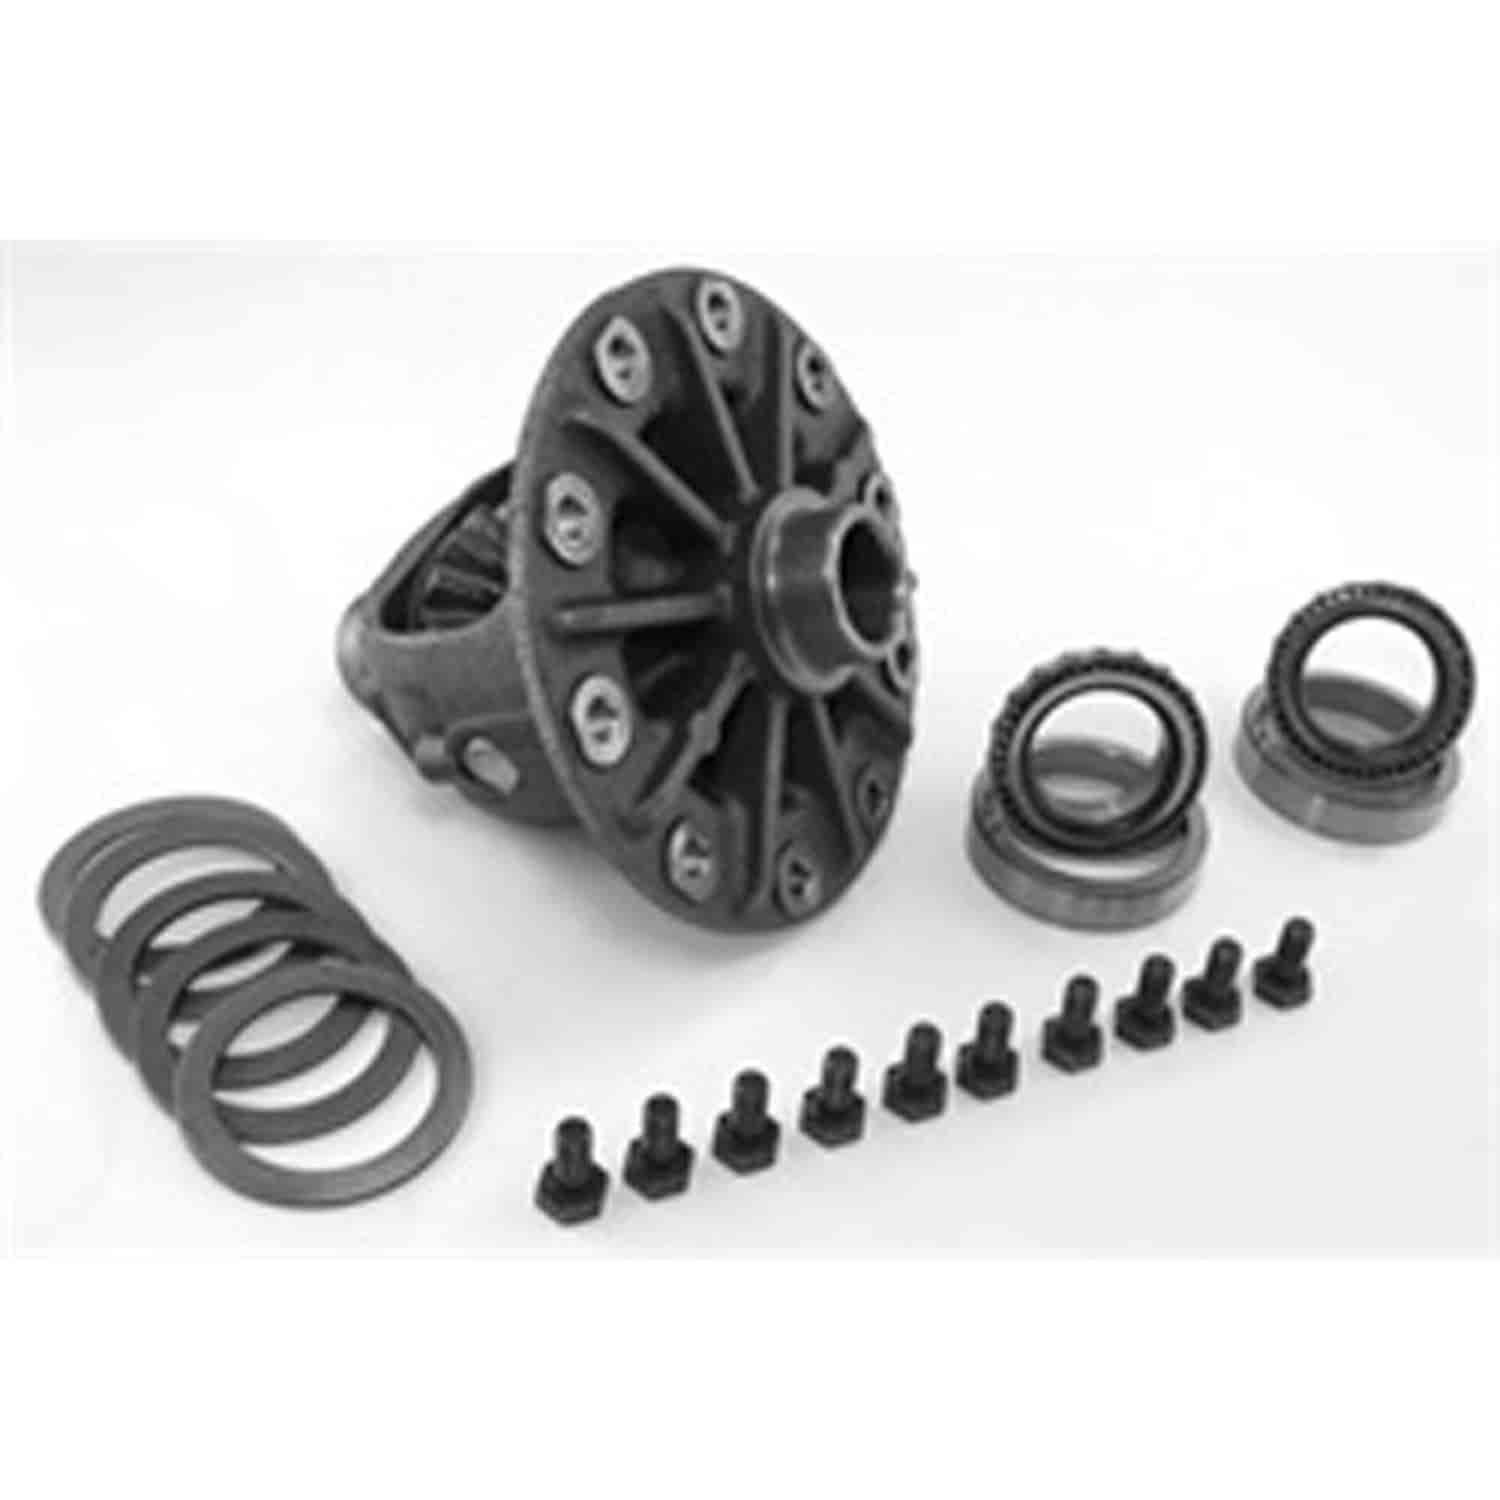 Differential carrier kit for 84-93 Cherokee XJ 87-93